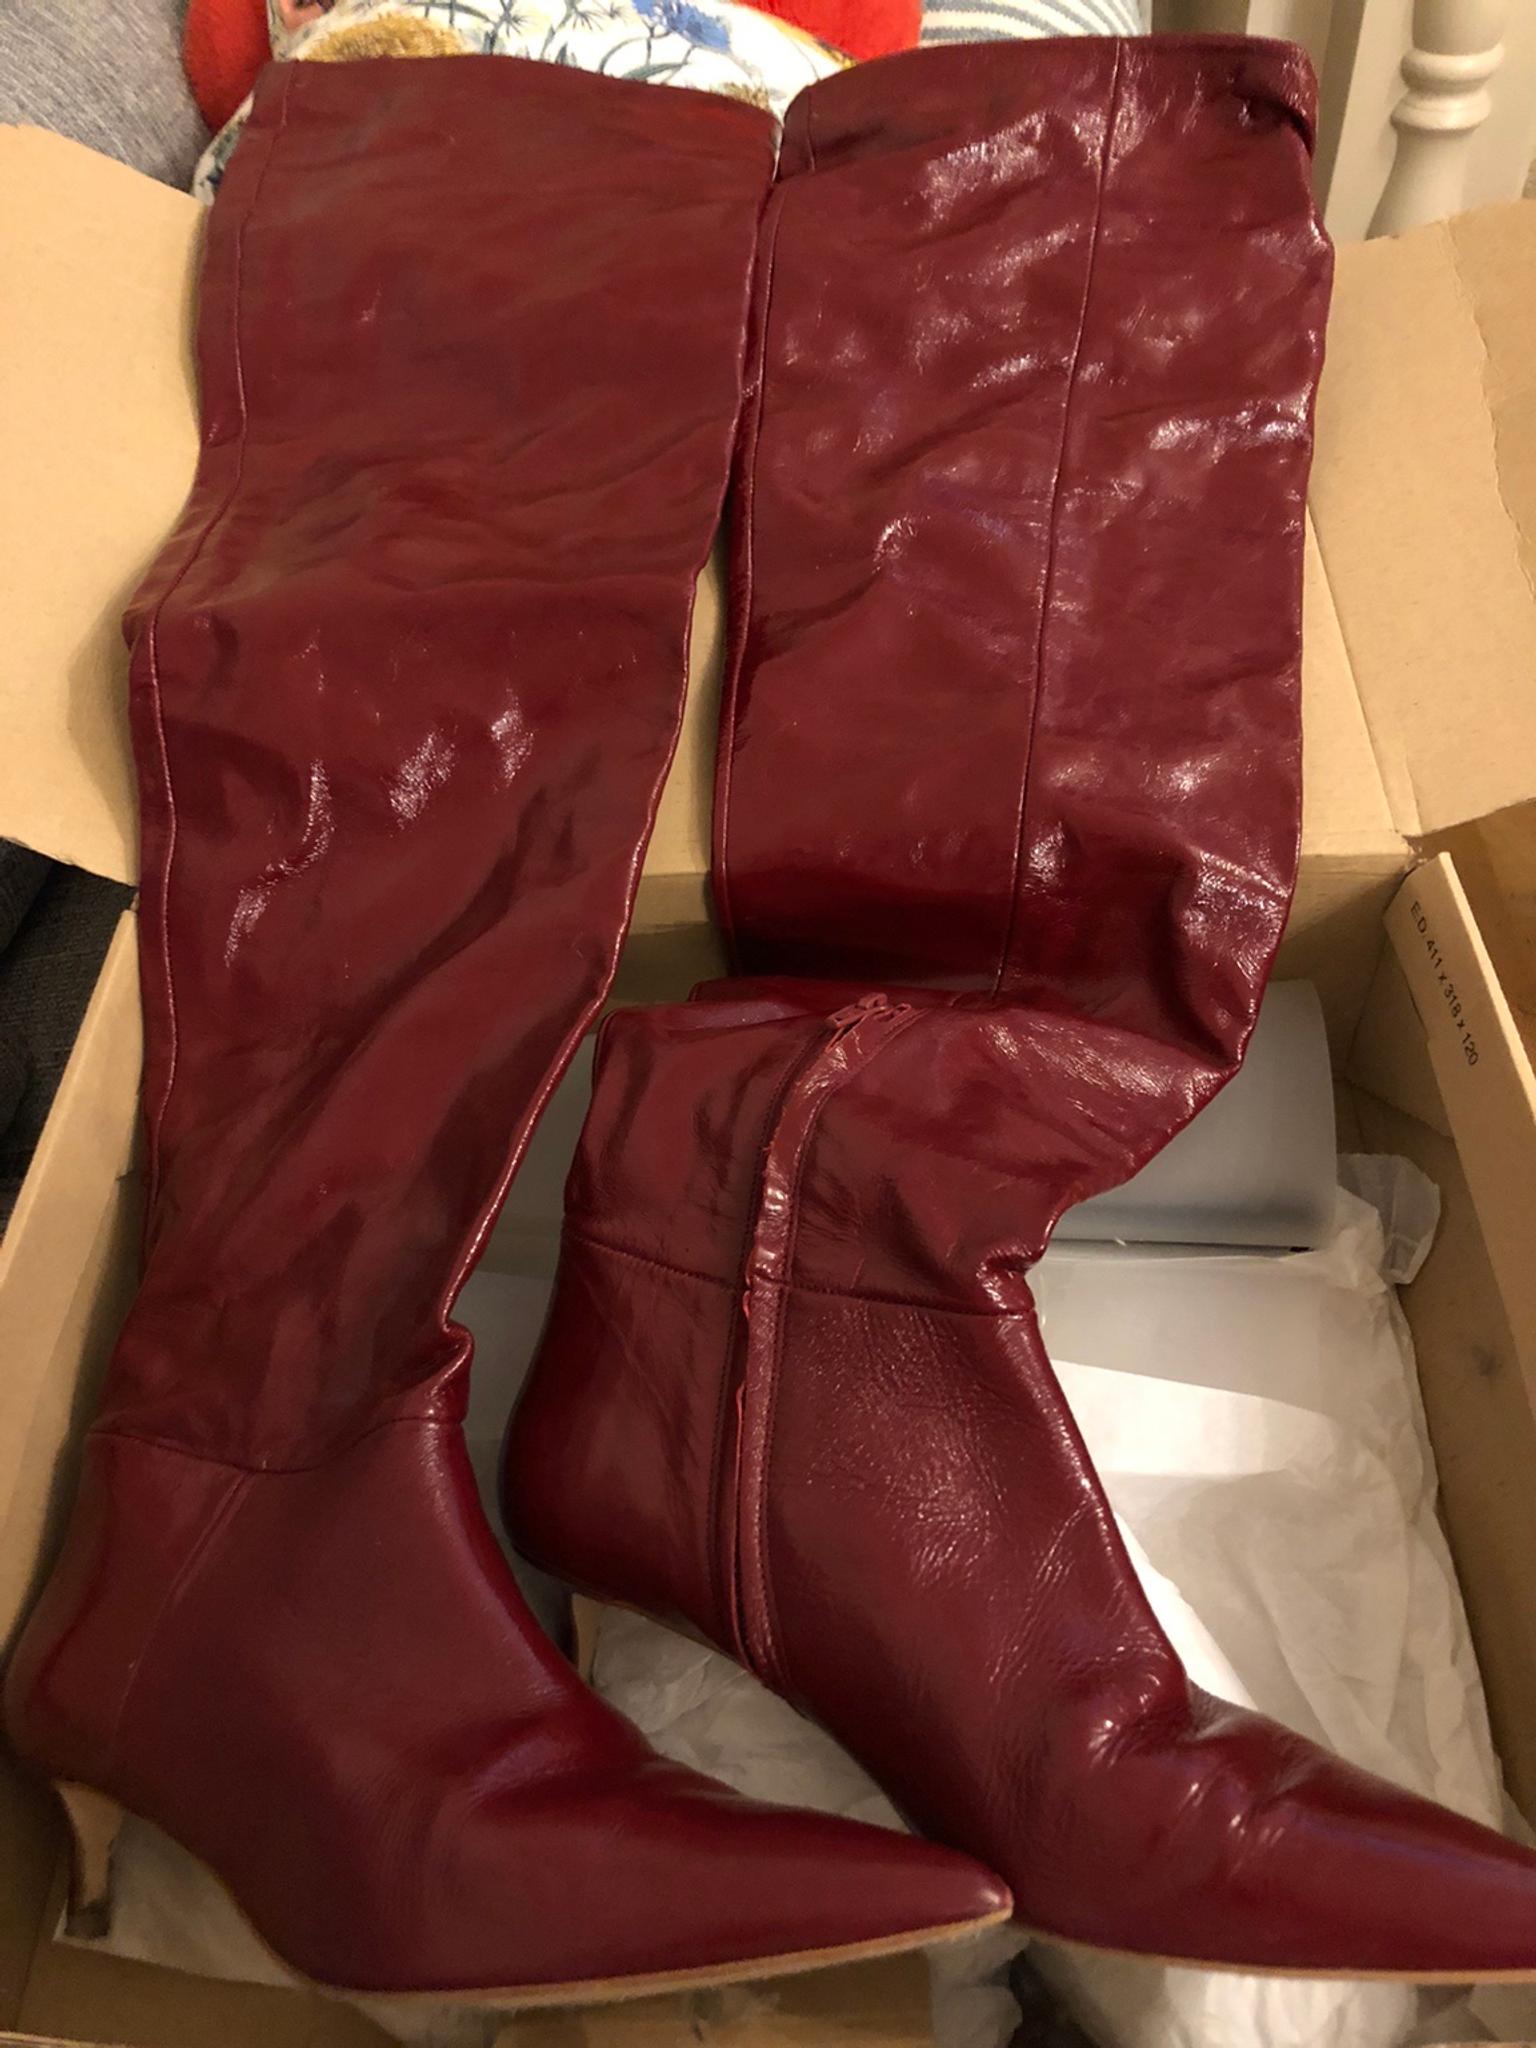 thigh high leather boots zara